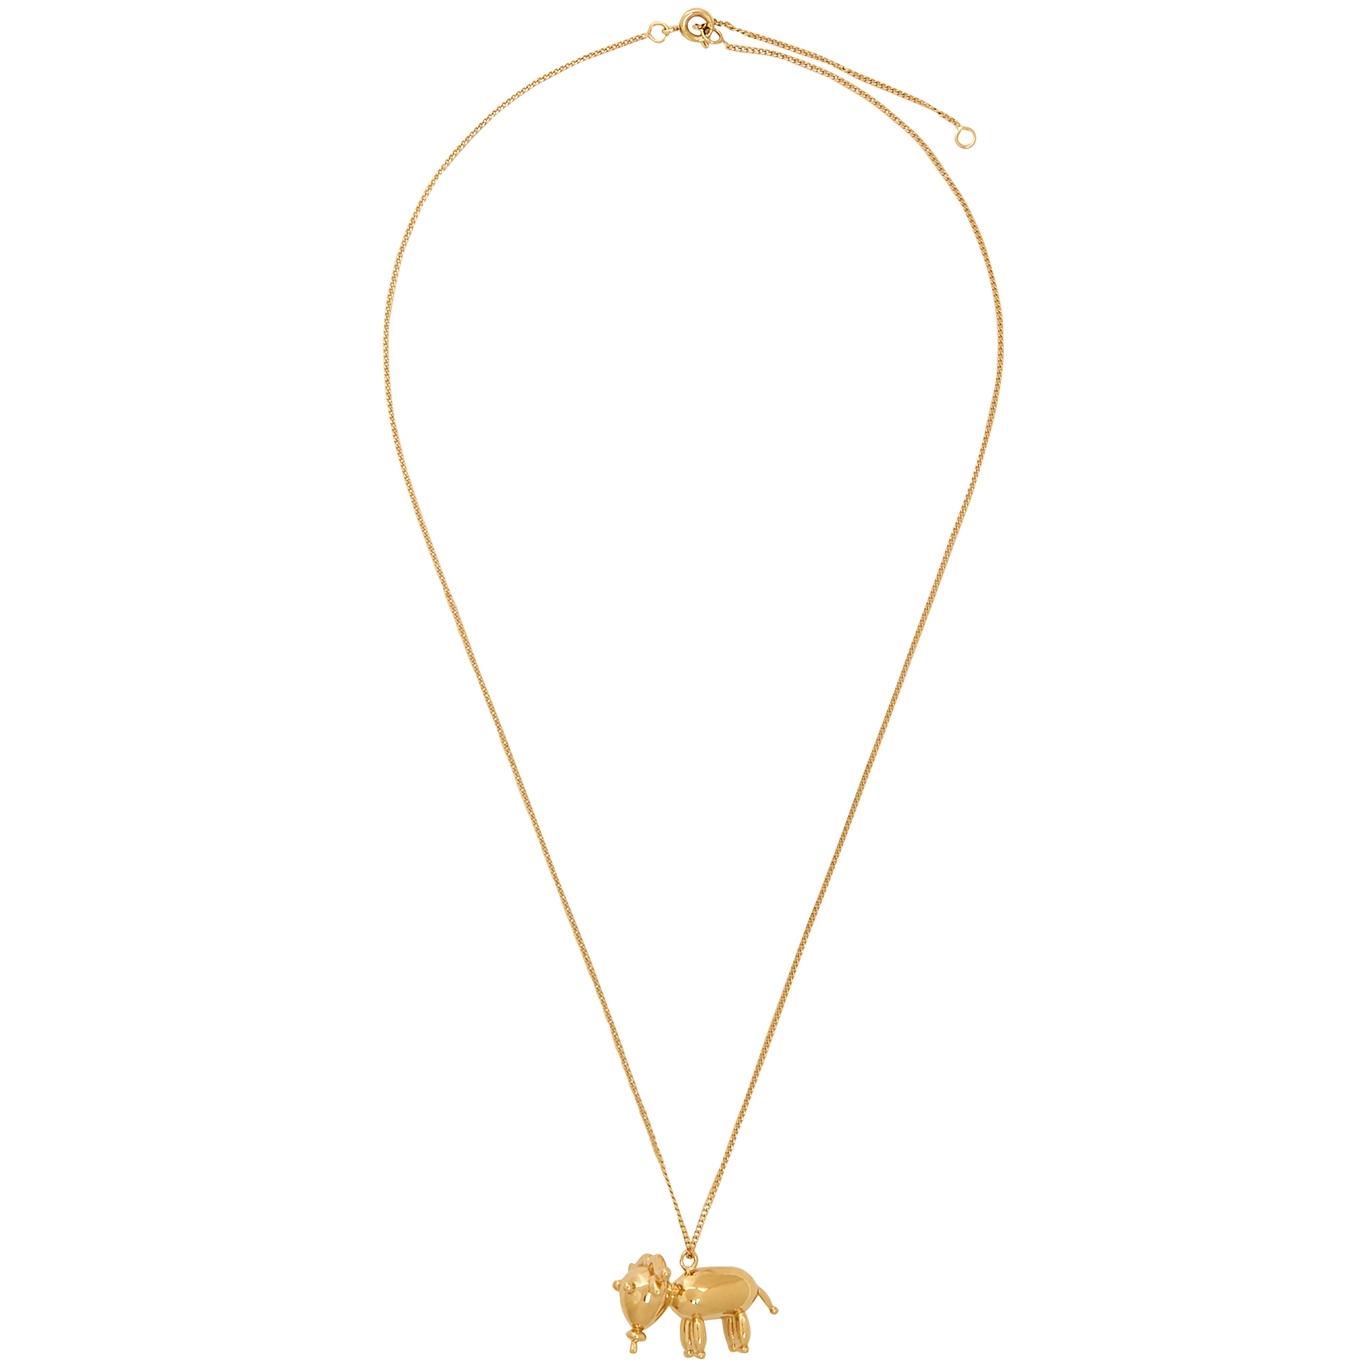 Completedworks Taurus Zodiac Balloon 14kt Gold-plated Necklace - One Size